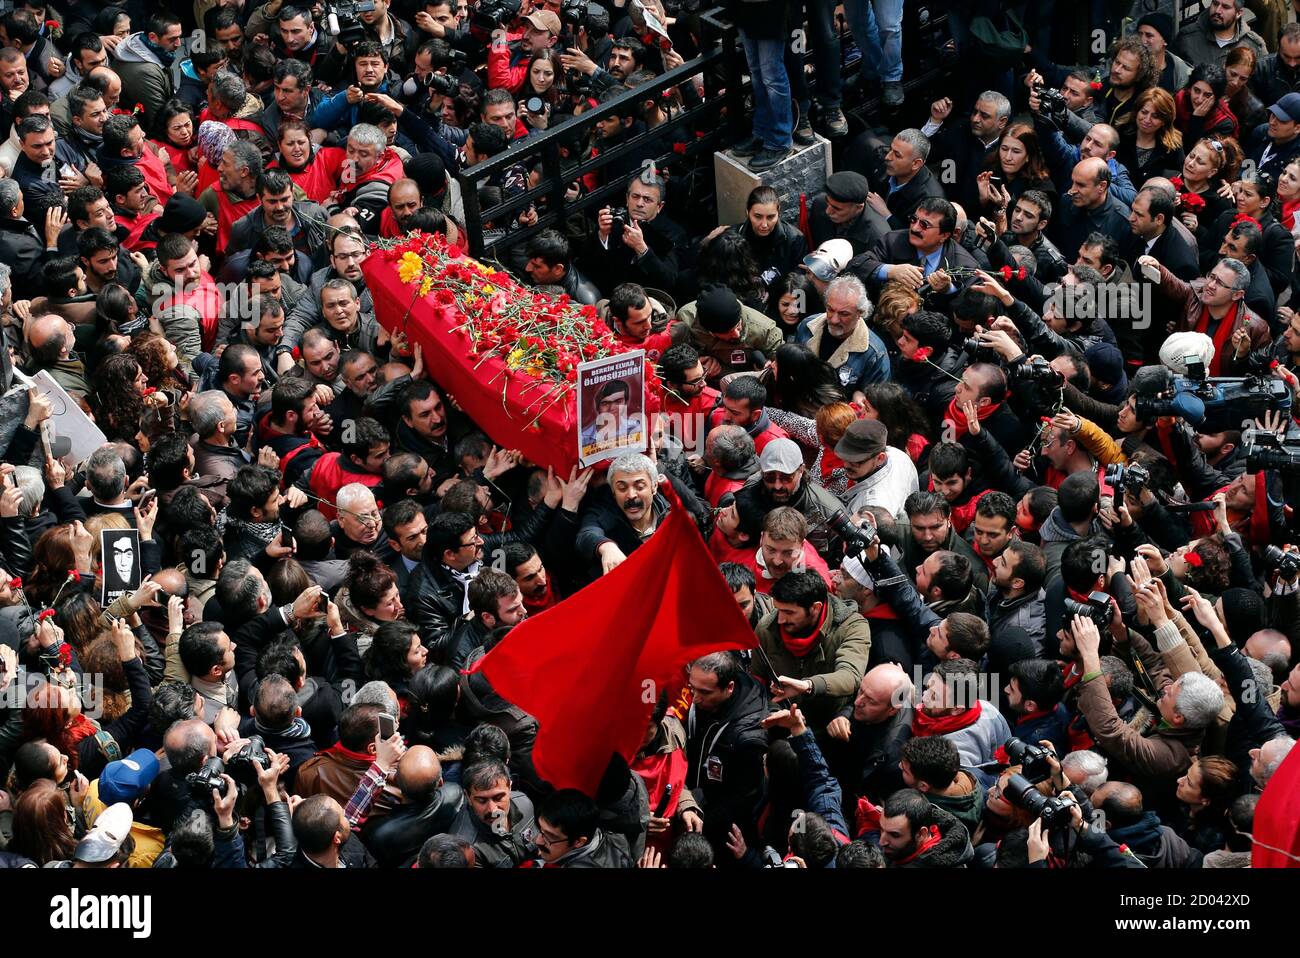 Mourners carry the coffin of Berkin Elvan during funeral ceremony in Okmeydani cemevi, an Alevi place of worship, in Istanbul March 12, 2014. Several thousand mourners gathered in central Istanbul on Wednesday for the funeral of Elvan, a 15-year-old boy wounded during anti-government demonstrations last summer whose death on Tuesday triggered protests across Turkey. REUTERS/Murad Sezer (TURKEY  - Tags: POLITICS CIVIL UNREST) Stock Photo